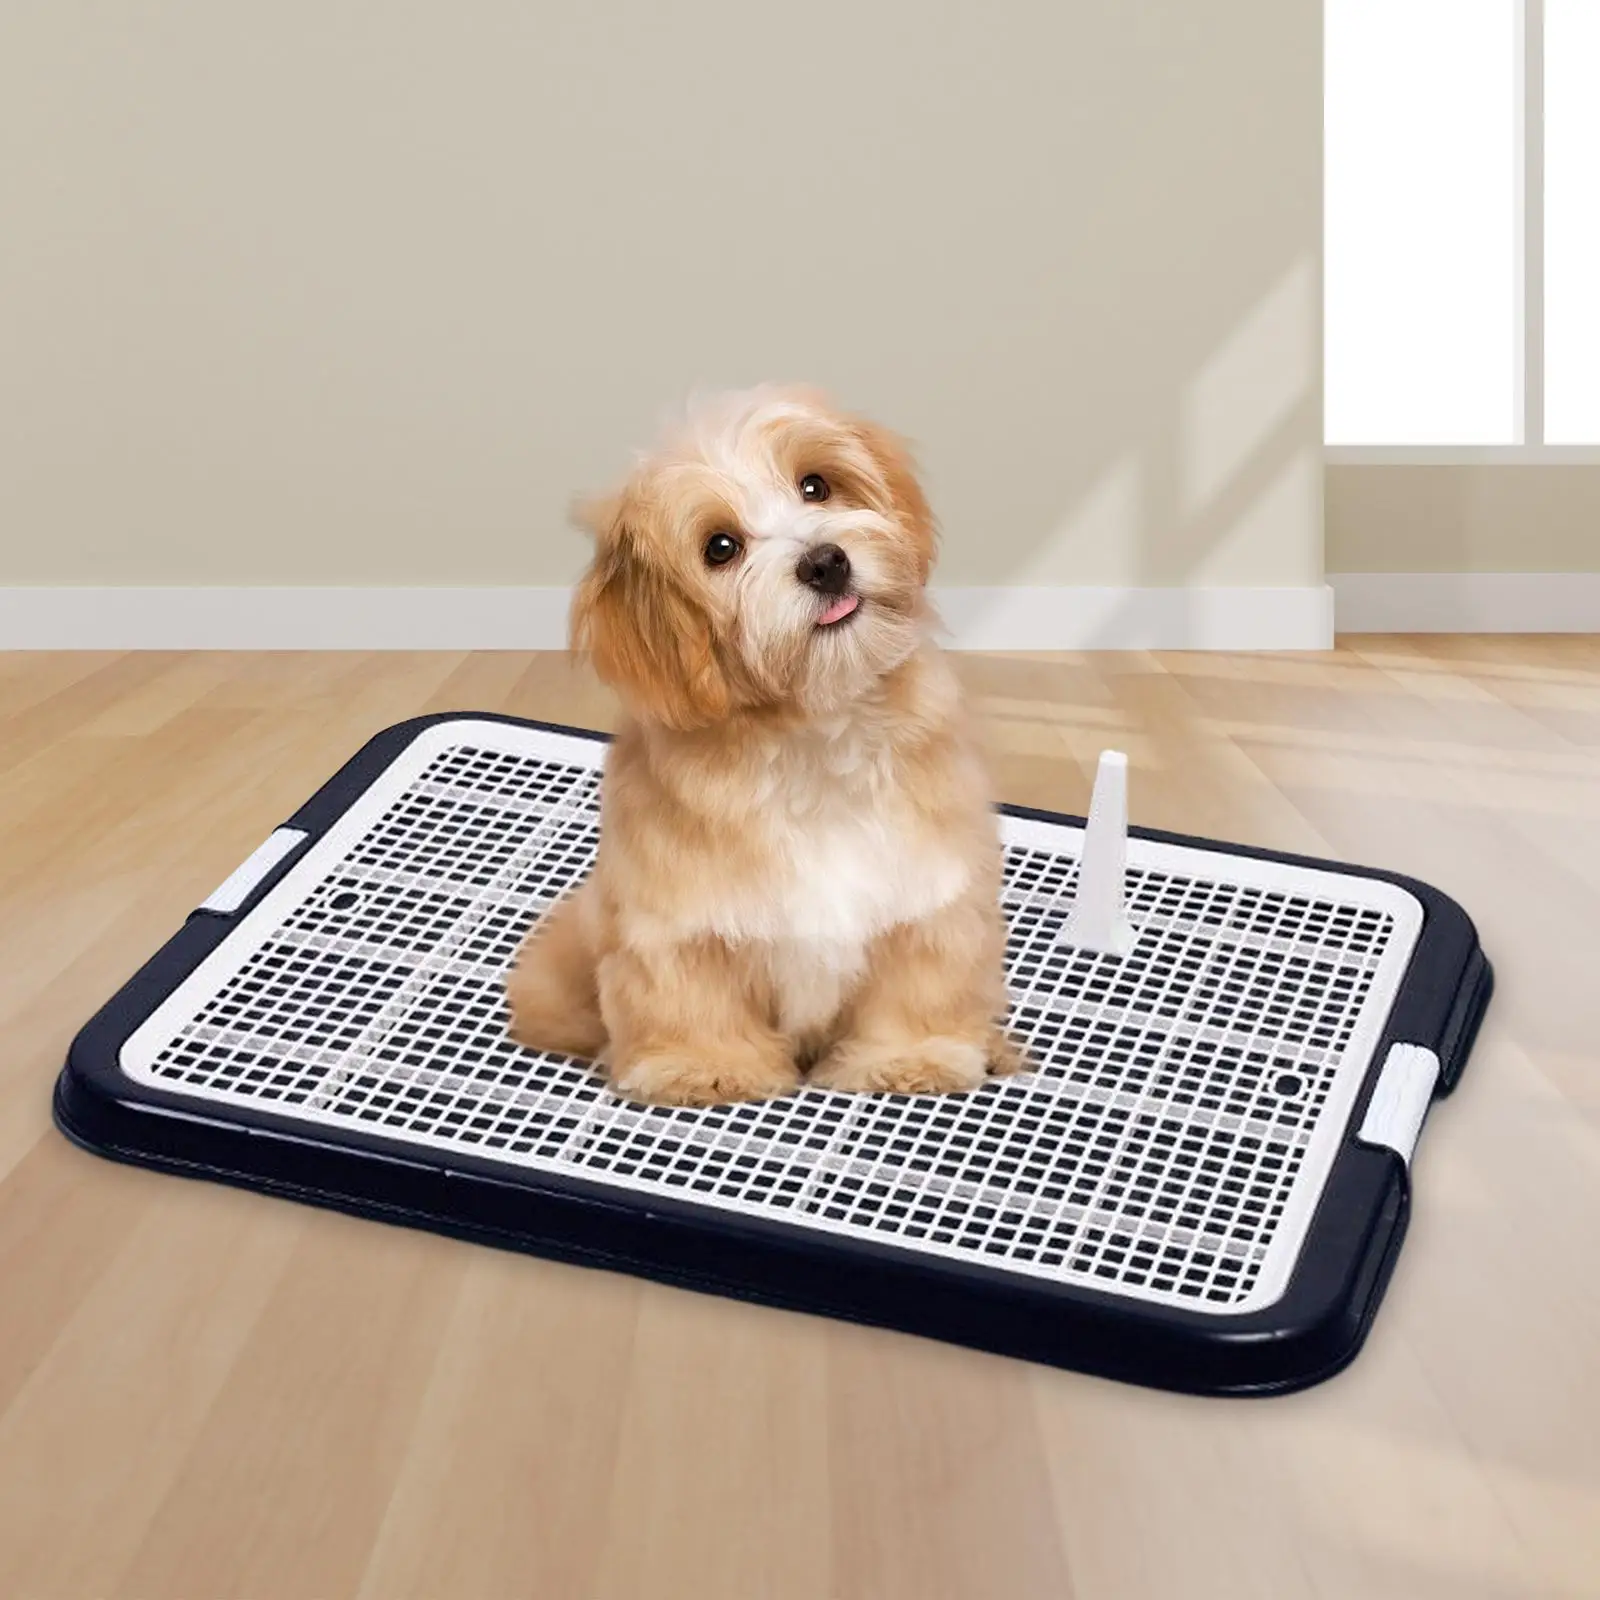 Dog Toilet Potty Trainer Easy Clean with Removable Mesh Grates Cat Litter Box Bedpan Puppy Training Tray for Small Animals